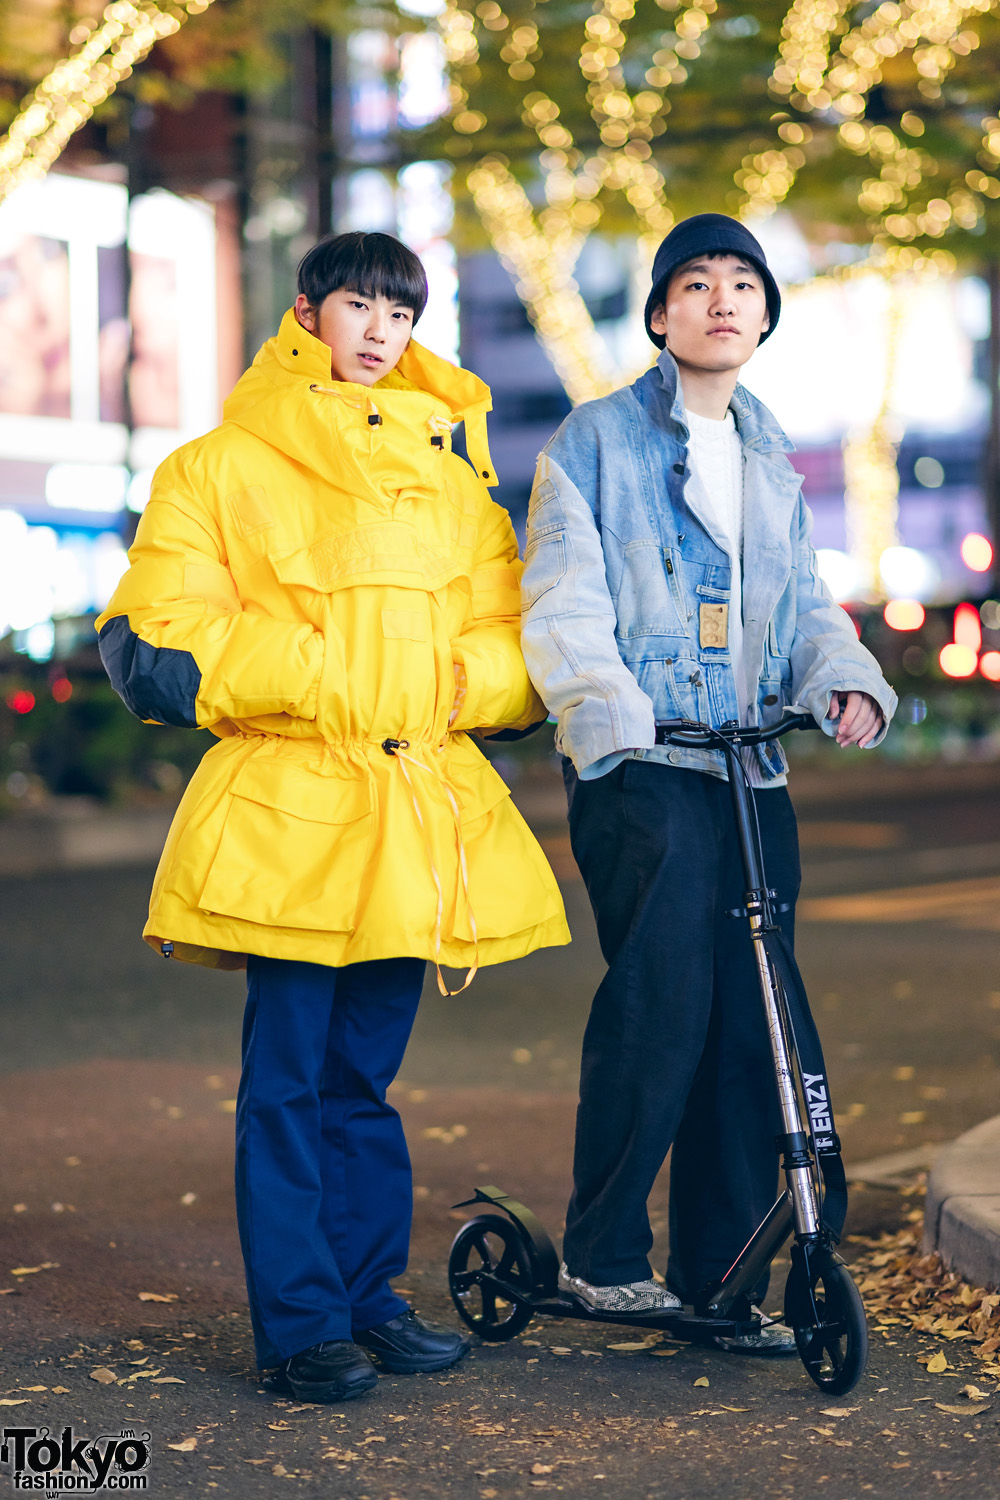 Winter Street Casual Styles in Harajuku w/ Frenzy Scooter, Napa, Lee, Maison Margiela, Polo Ralph Lauren, Z-Coil & Palace Snakeskin Boots